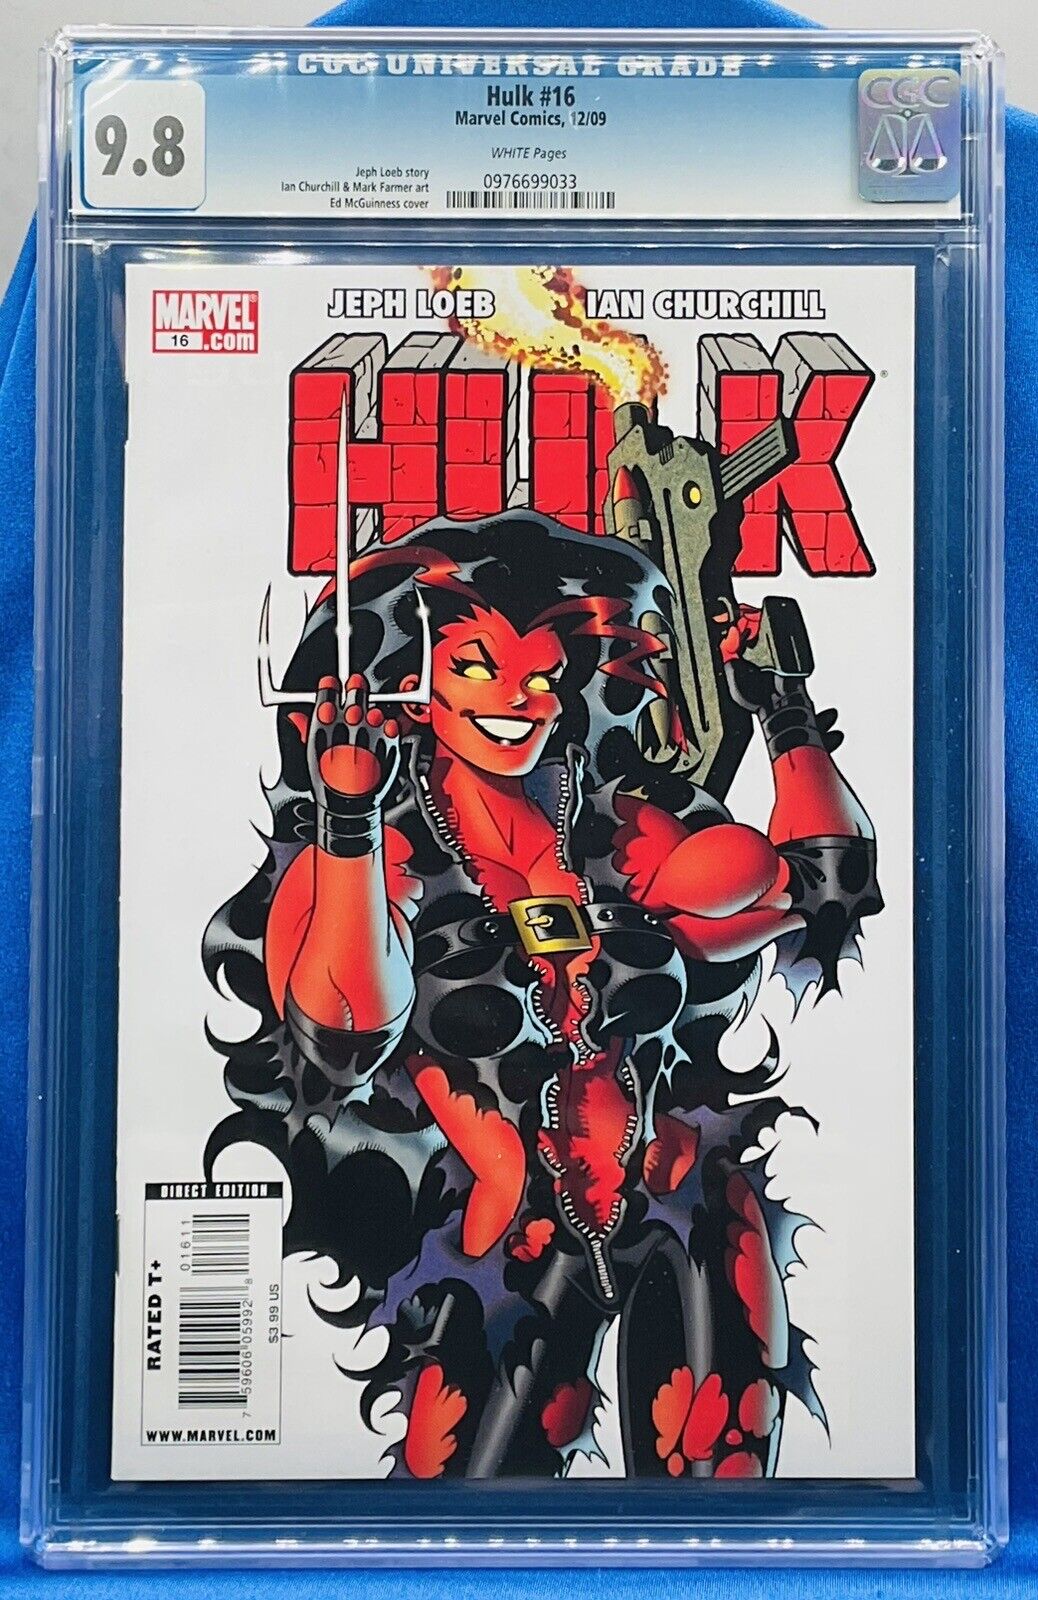 HULK #16 (2009) **CGC 9.8** - 1ST APPEARANCE OF RED SHE-HULK - 9.8 WHITE PAGES